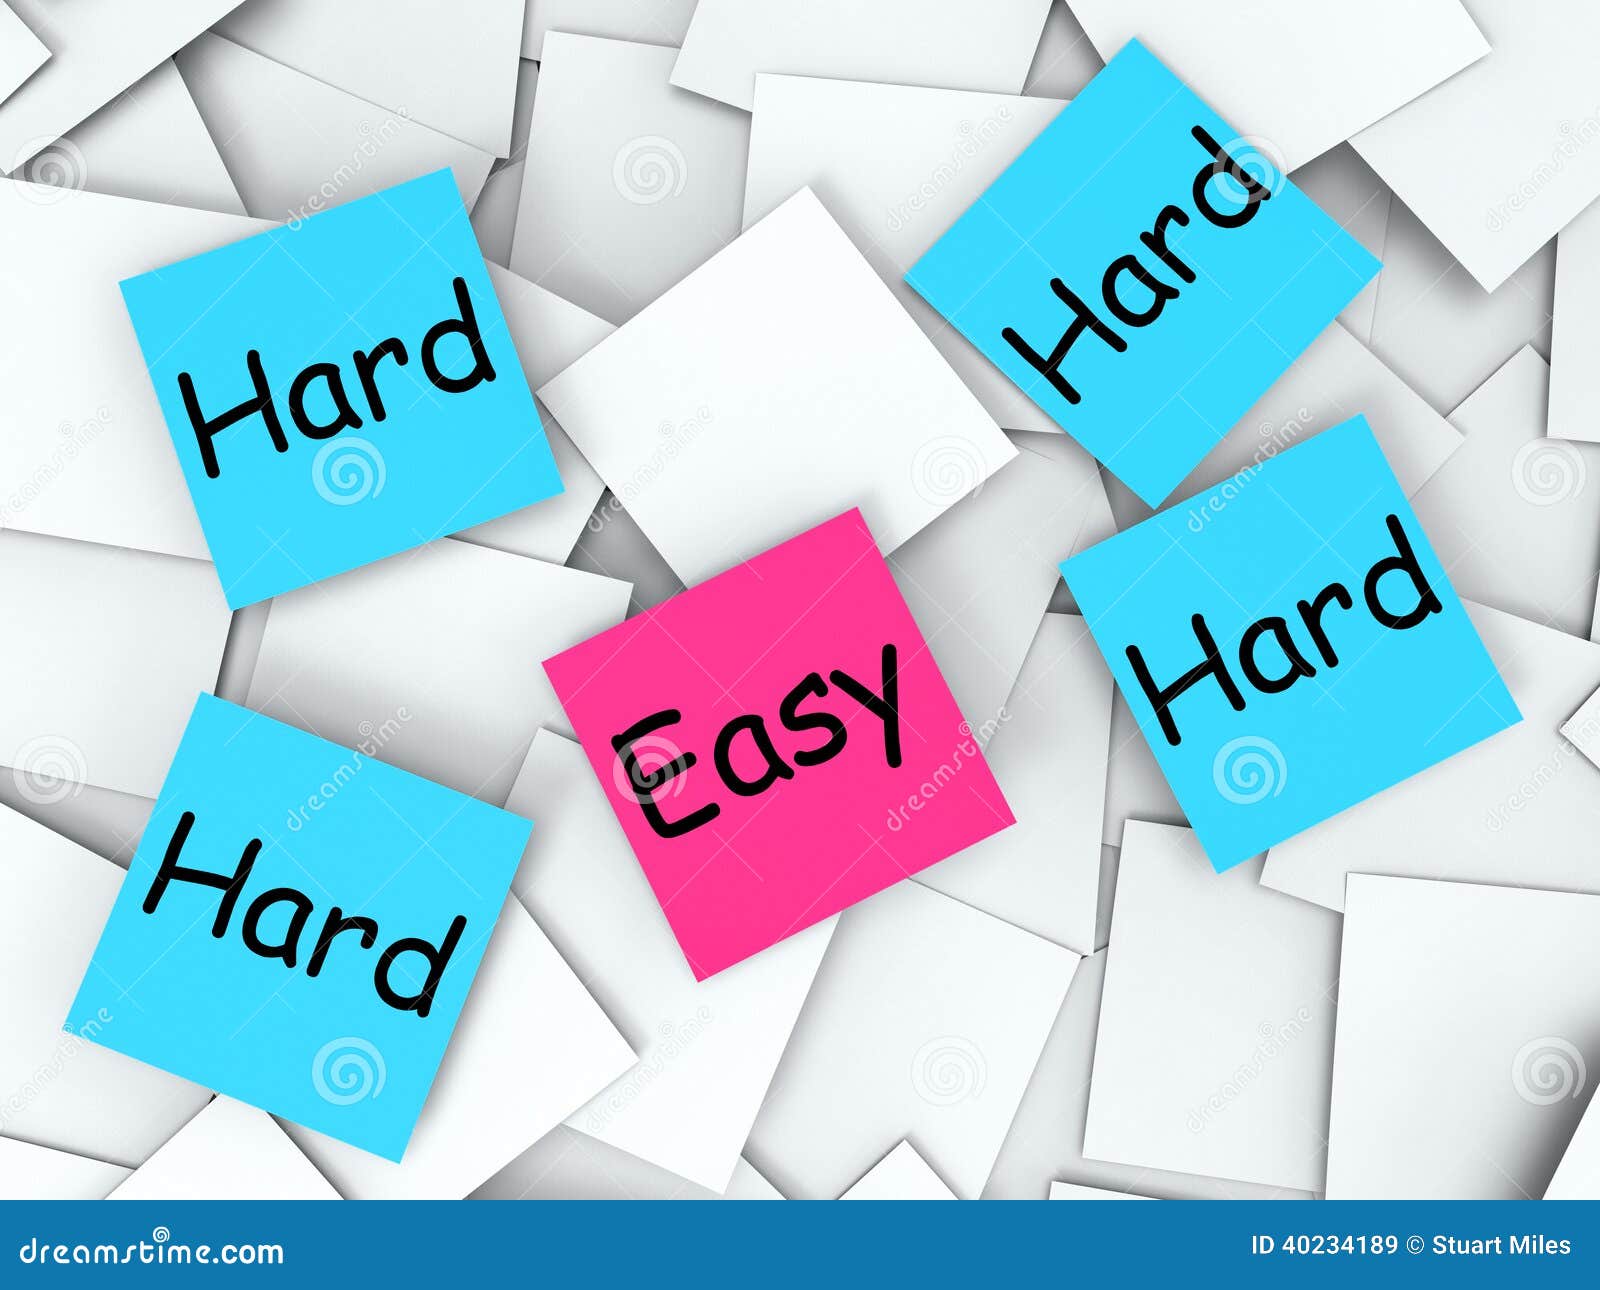 easy hard post-it notes mean effortless or